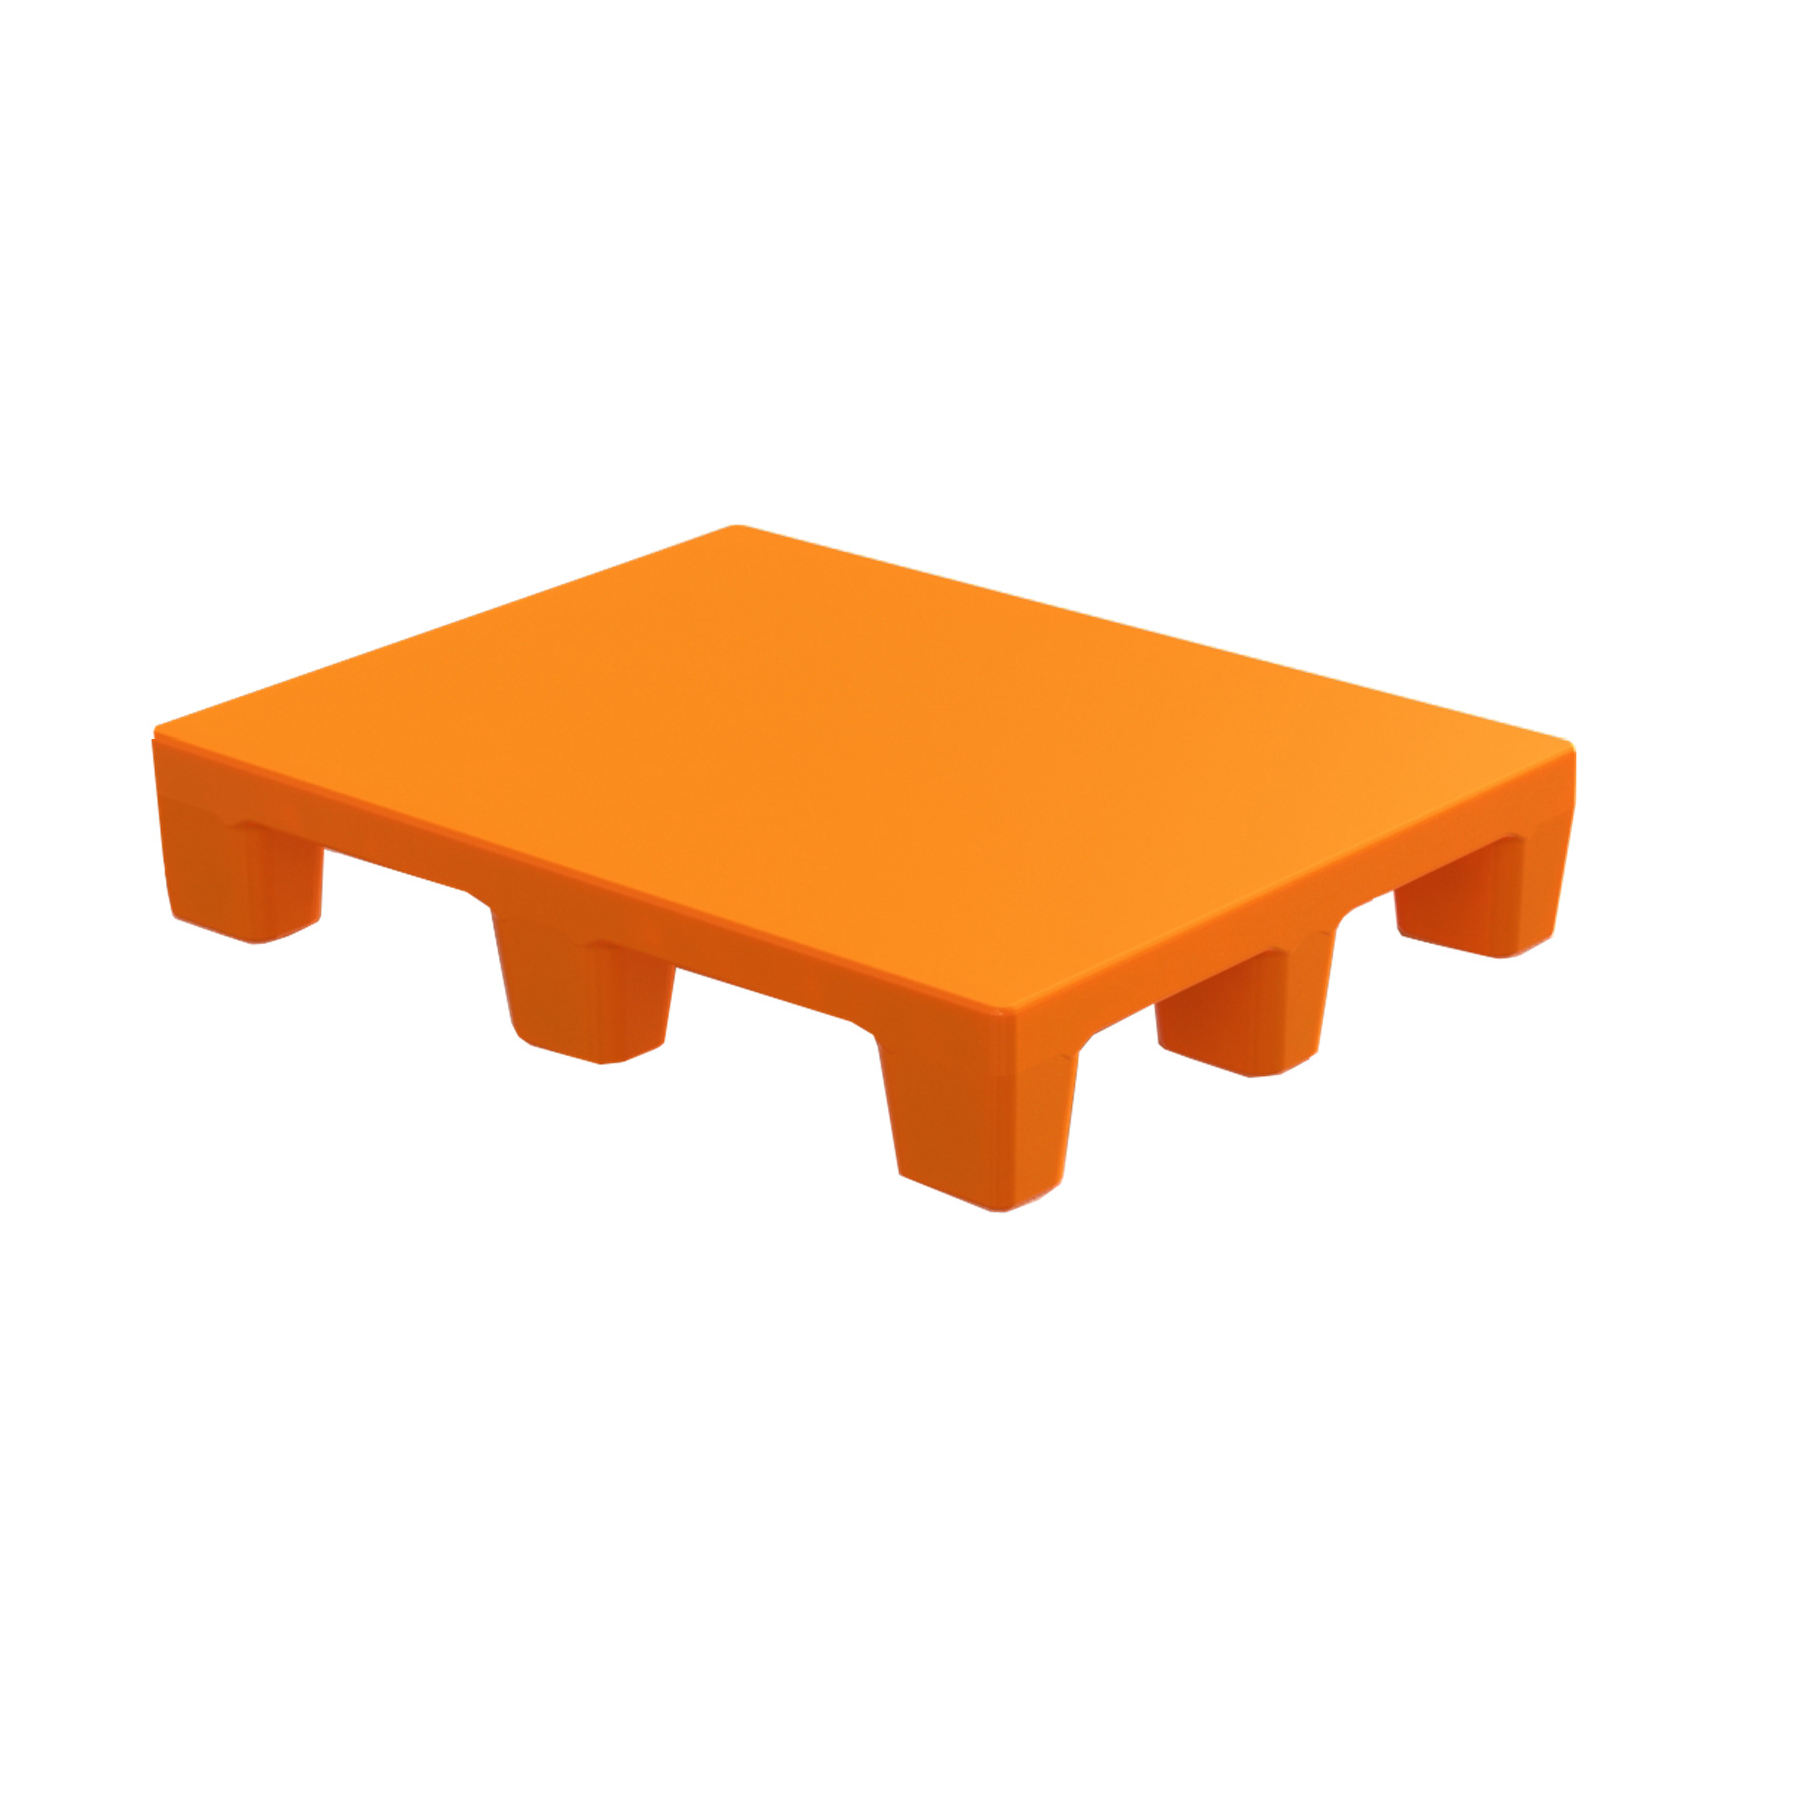 Swift TechnoPlast Roto Moulded Plastic Pallet 4 Way Non-Reversible Steel Reinforced Plain Top 900 x 700 x 160mm (Pack of 5)